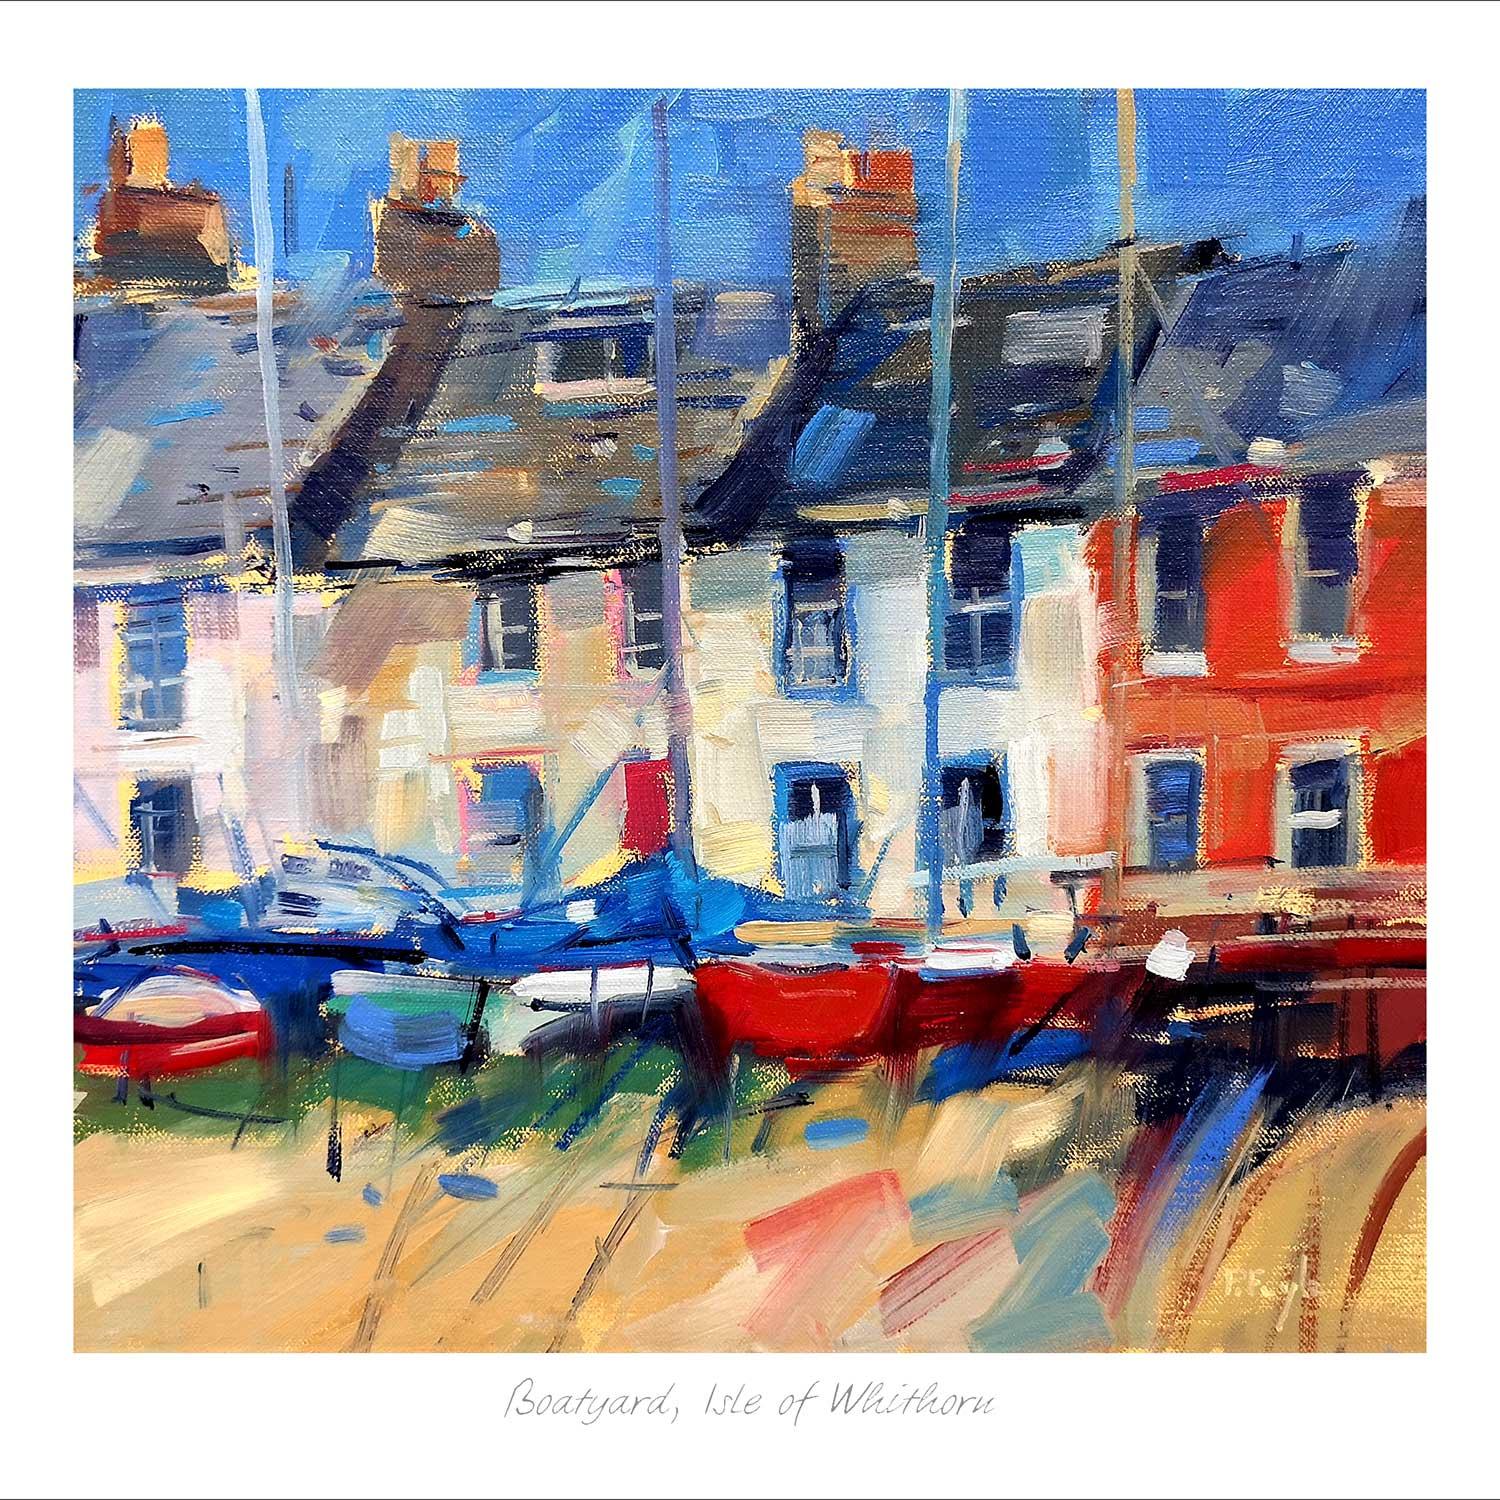 Boatyard, Isle of Whithorn Art Print from an original painted by artist Peter Foyle